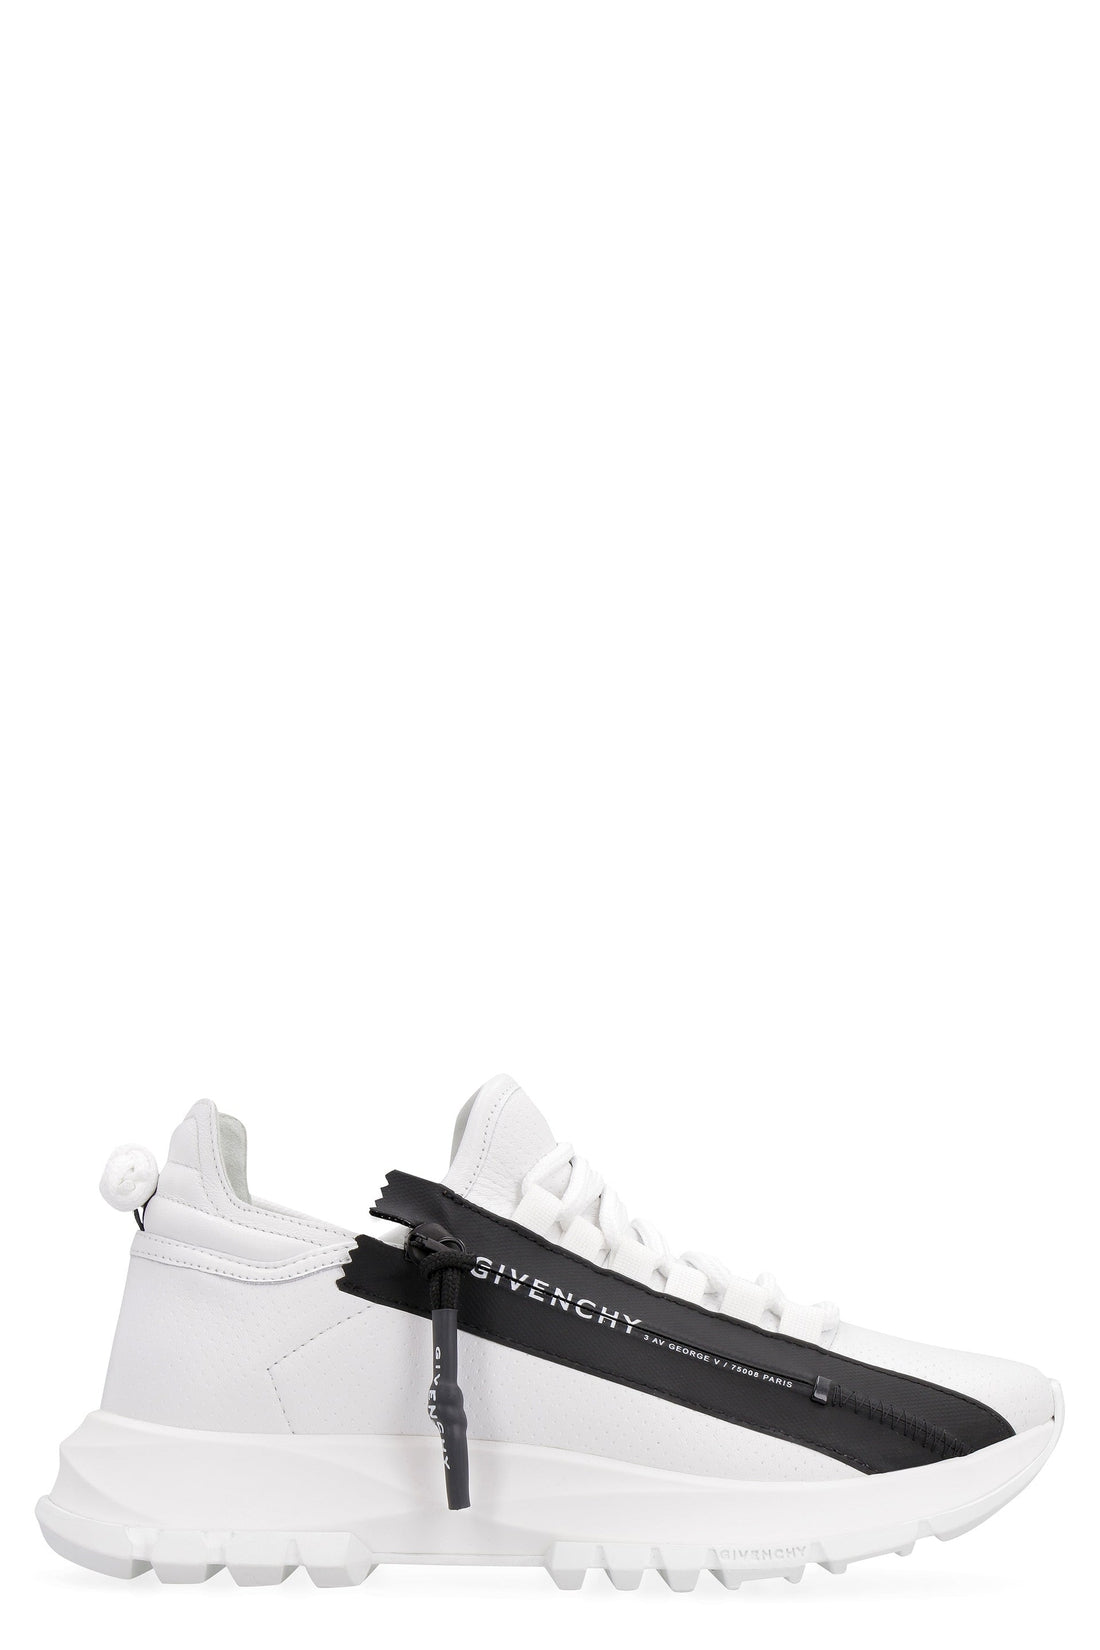 Givenchy-OUTLET-SALE-Spectre logo detail leather sneakers-ARCHIVIST